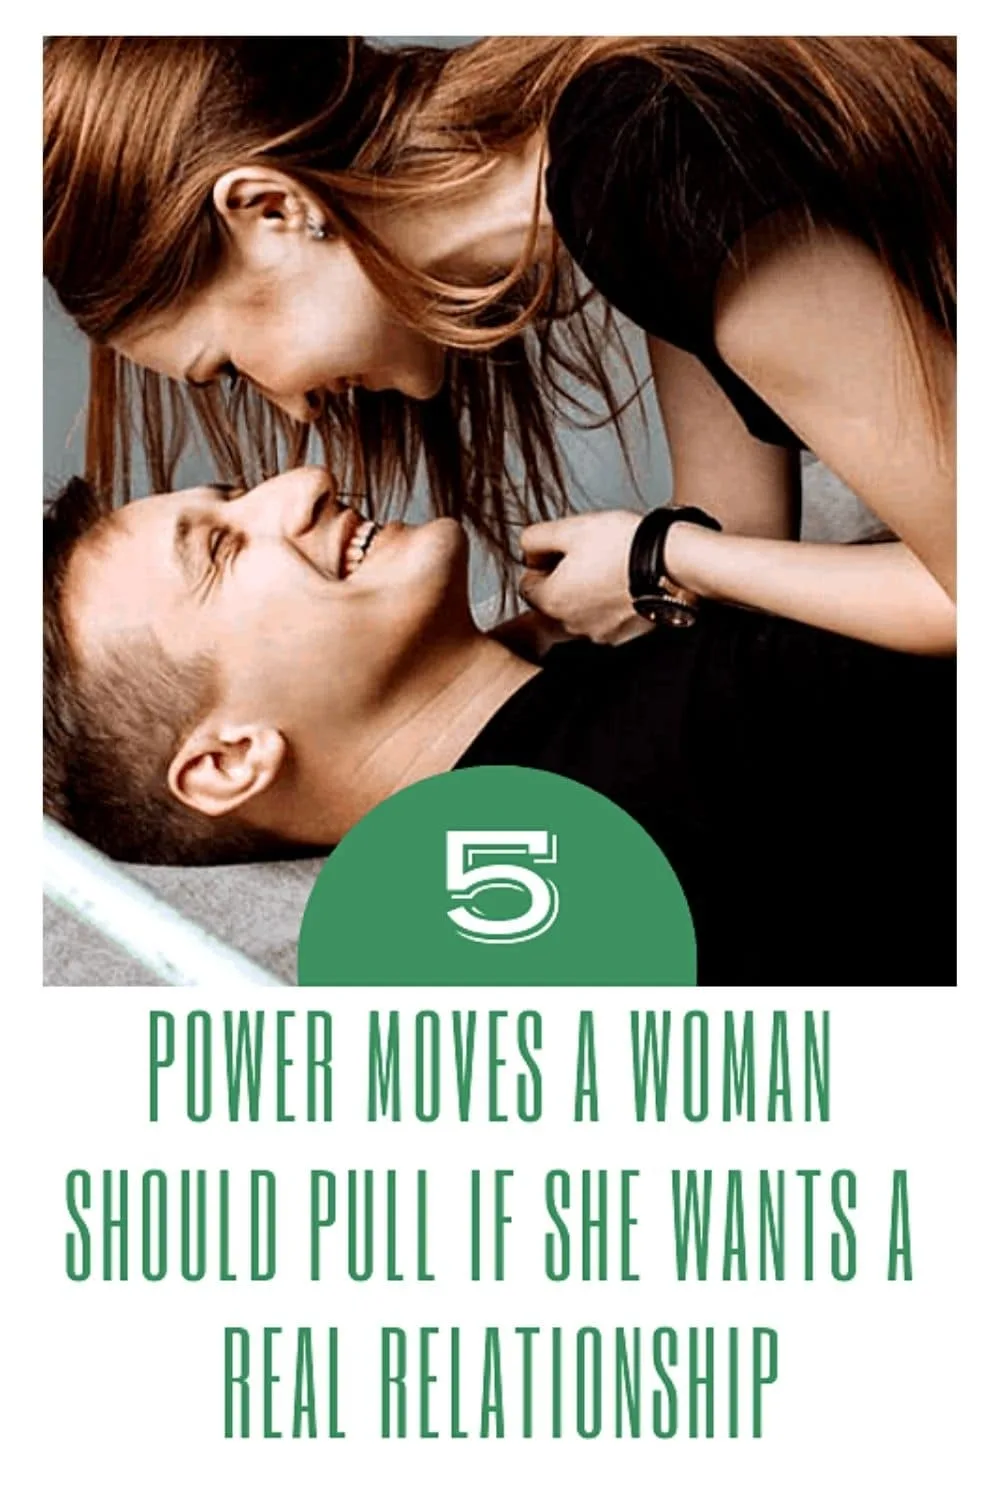 5 Power Moves A Woman Should Pull If She Wants A Real Relationship